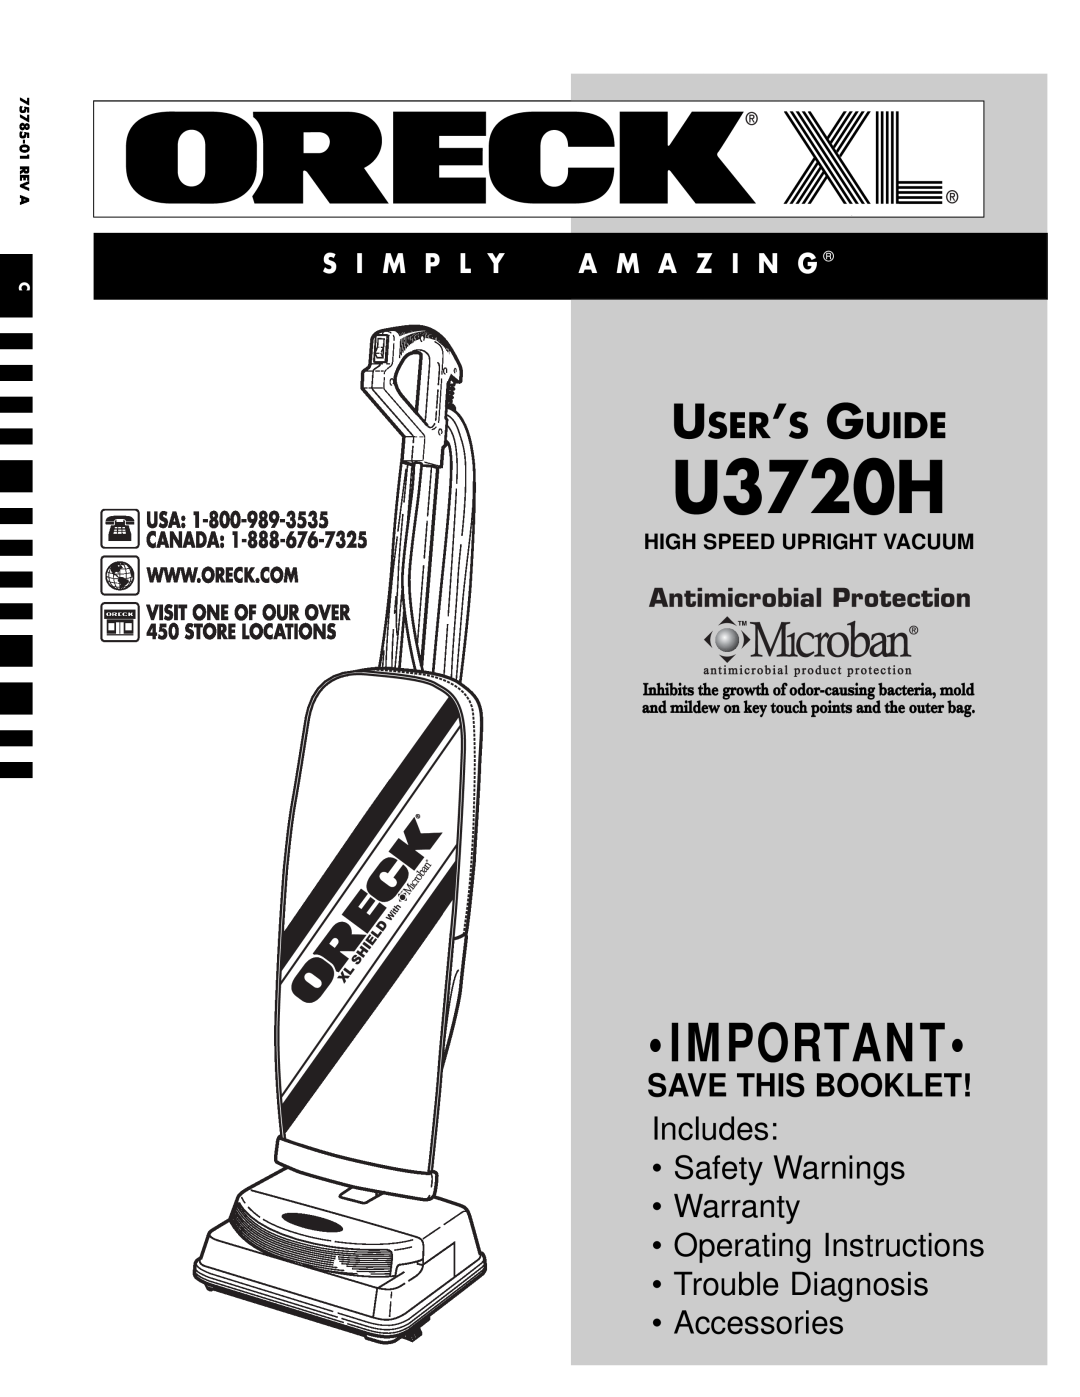 Oreck U3720H warranty Save This Booklet, High Speed Upright Vacuum, User’S Guide, Includes Safety Warnings Warranty 